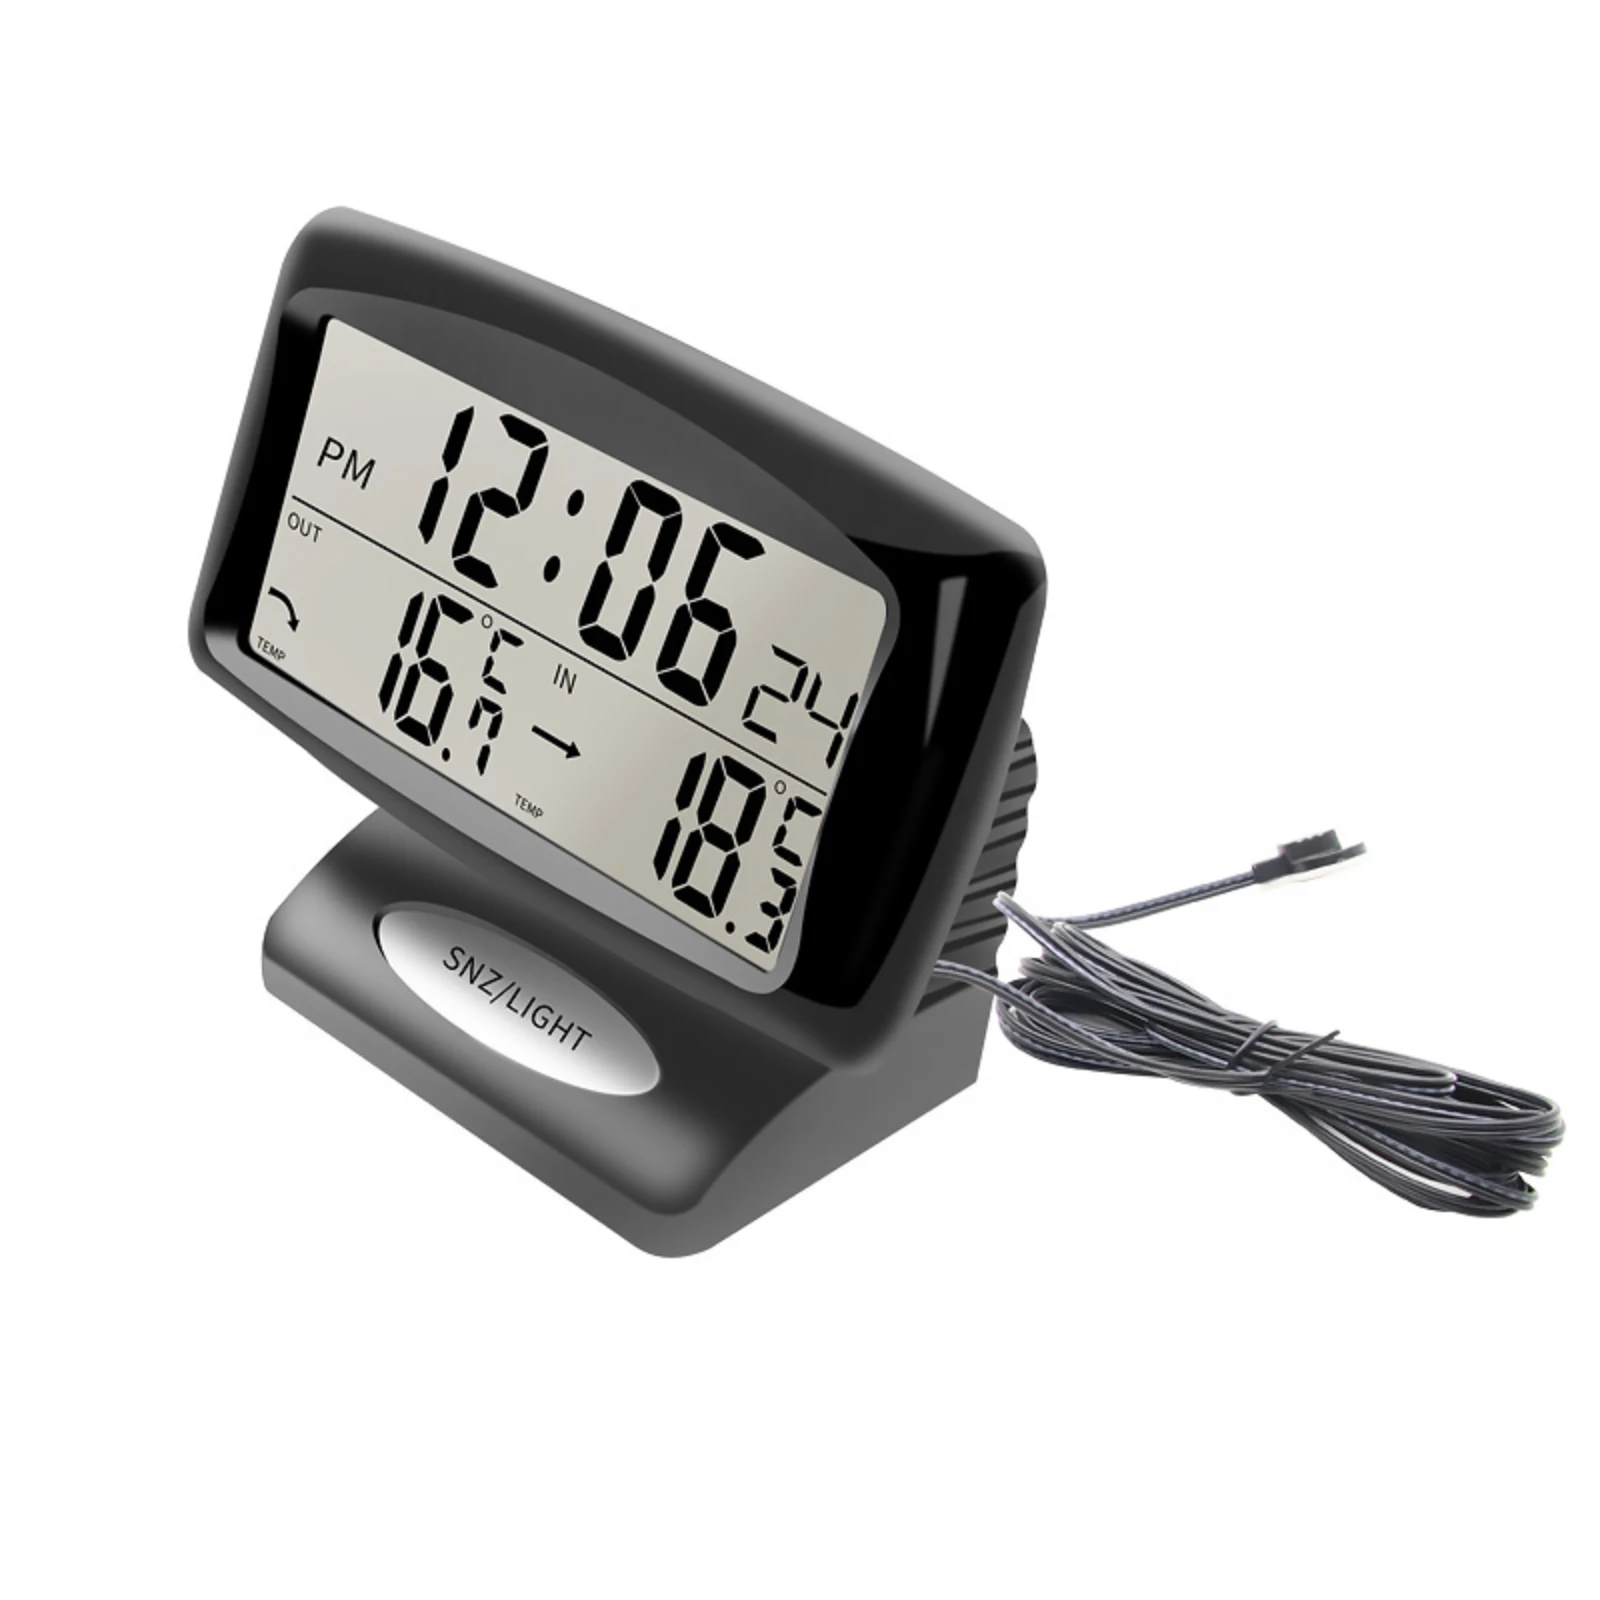 

Car In&Outdoor Thermometer Digital LCD Display Time Clocks Alarm Calendar 2 in 1 Temperature Clock With Backlight Auto Accessory